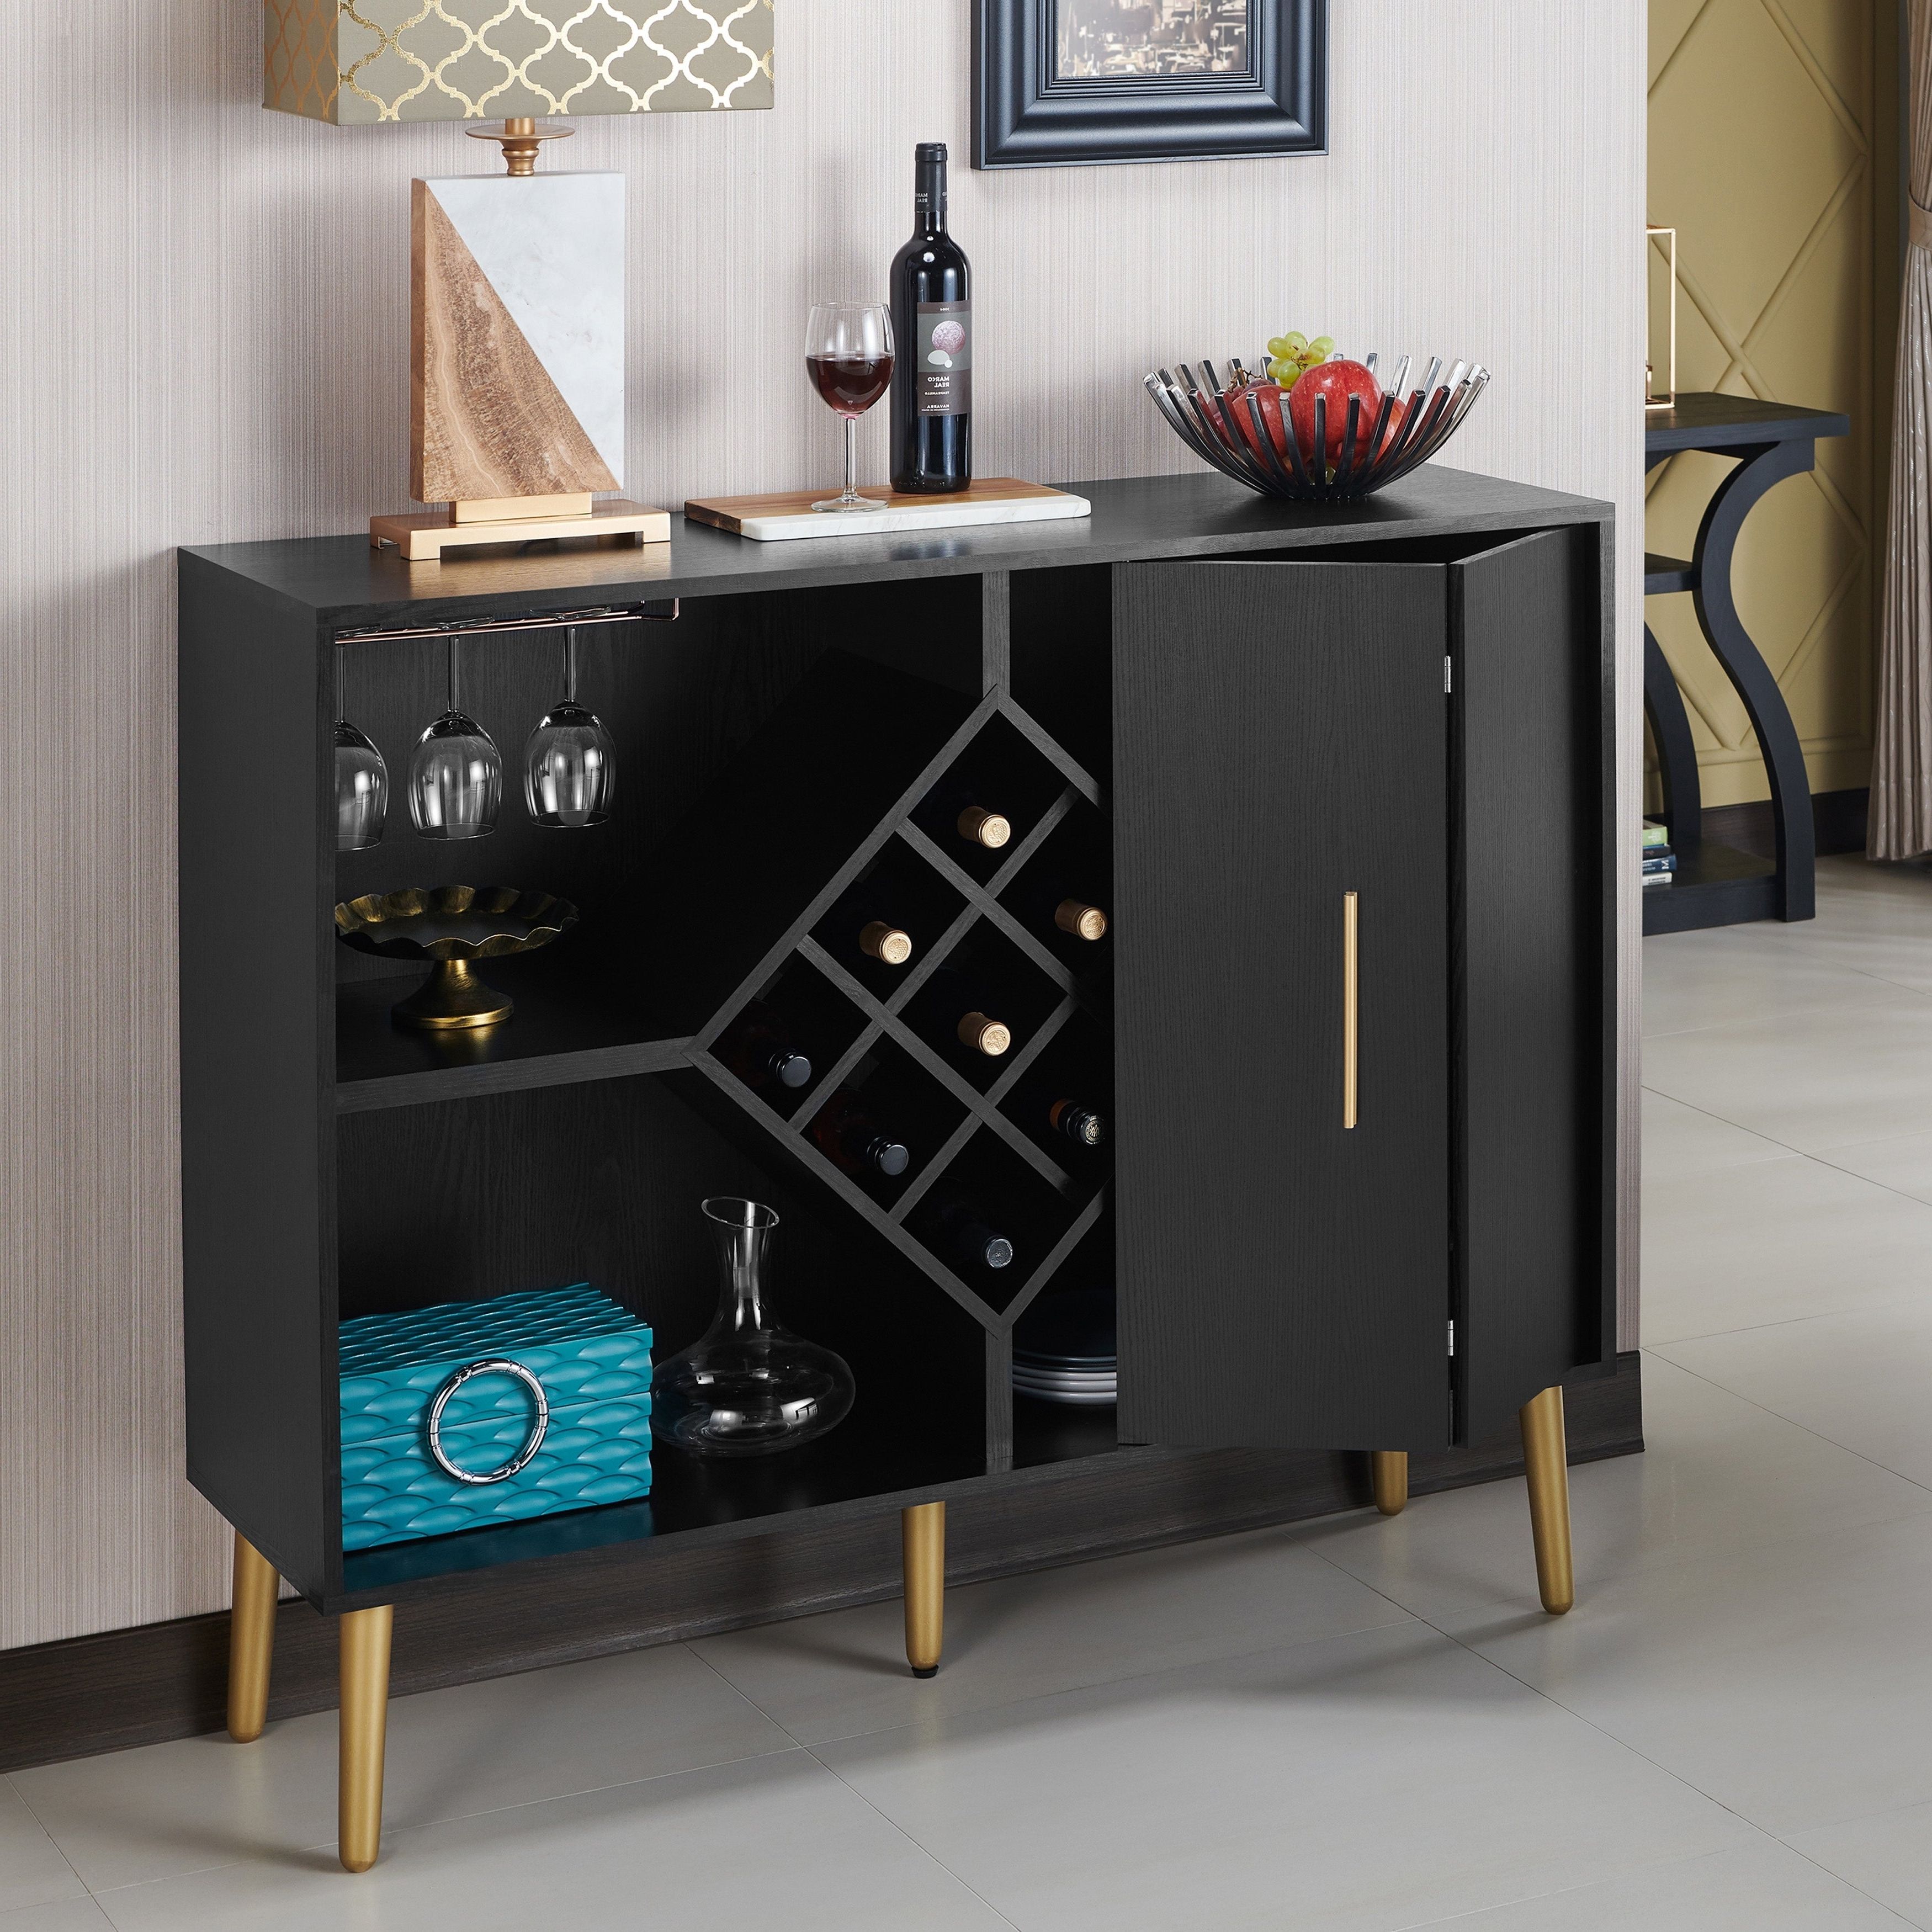 Carson Carrington Lesund Modern Black Storage Buffet With Regard To Wooden Buffets With Two Side Door Storage Cabinets And Stemware Rack (View 7 of 20)